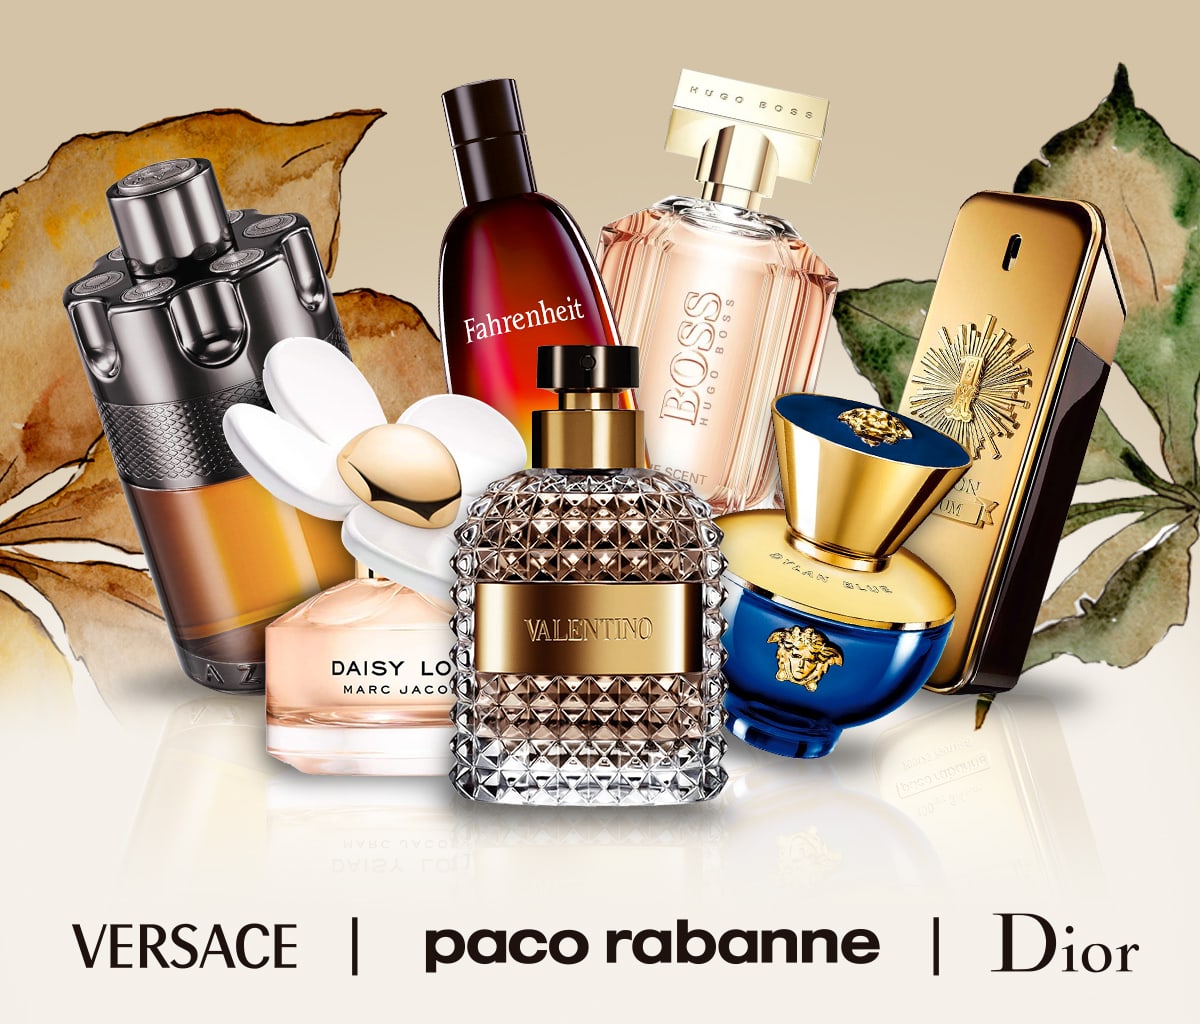 Biggest Fall Sale - Perfume and cologne bottles and fall leaves